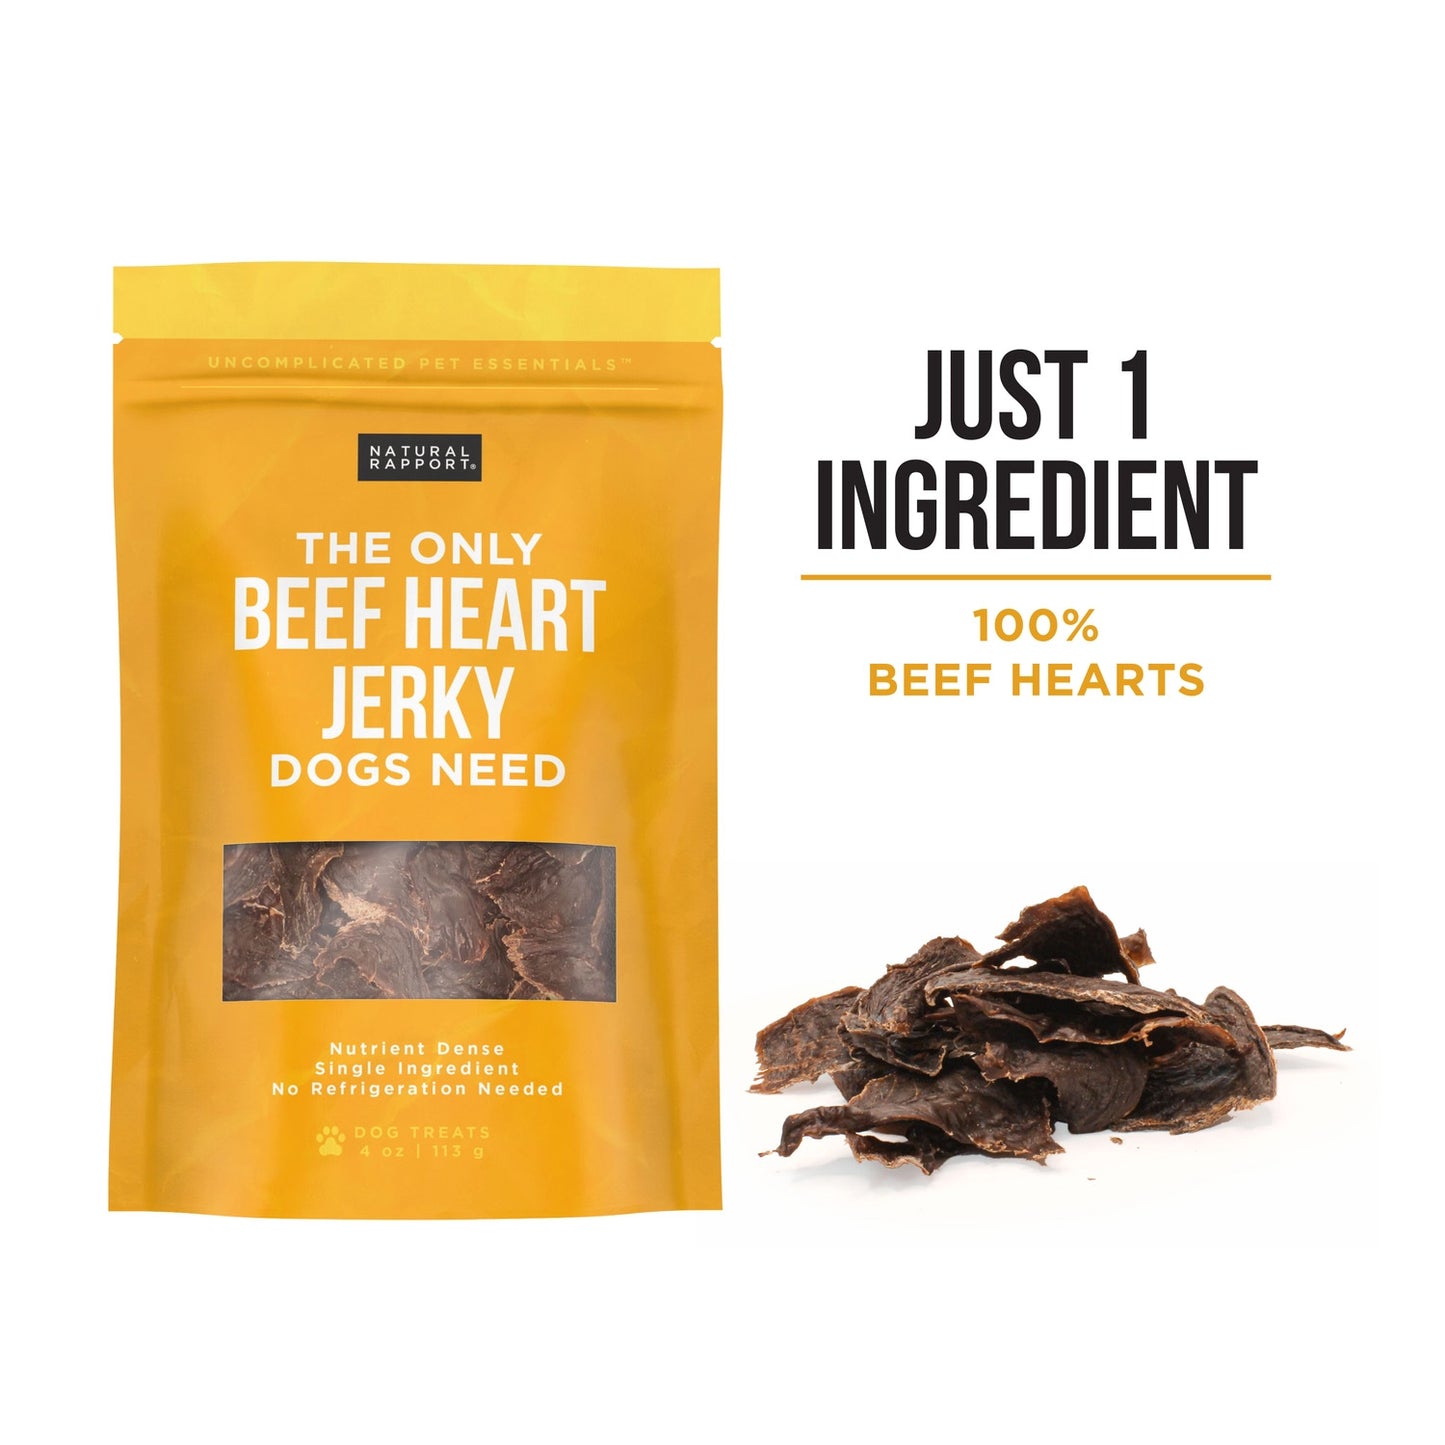 Only Beef Heart Jerky Dogs Need